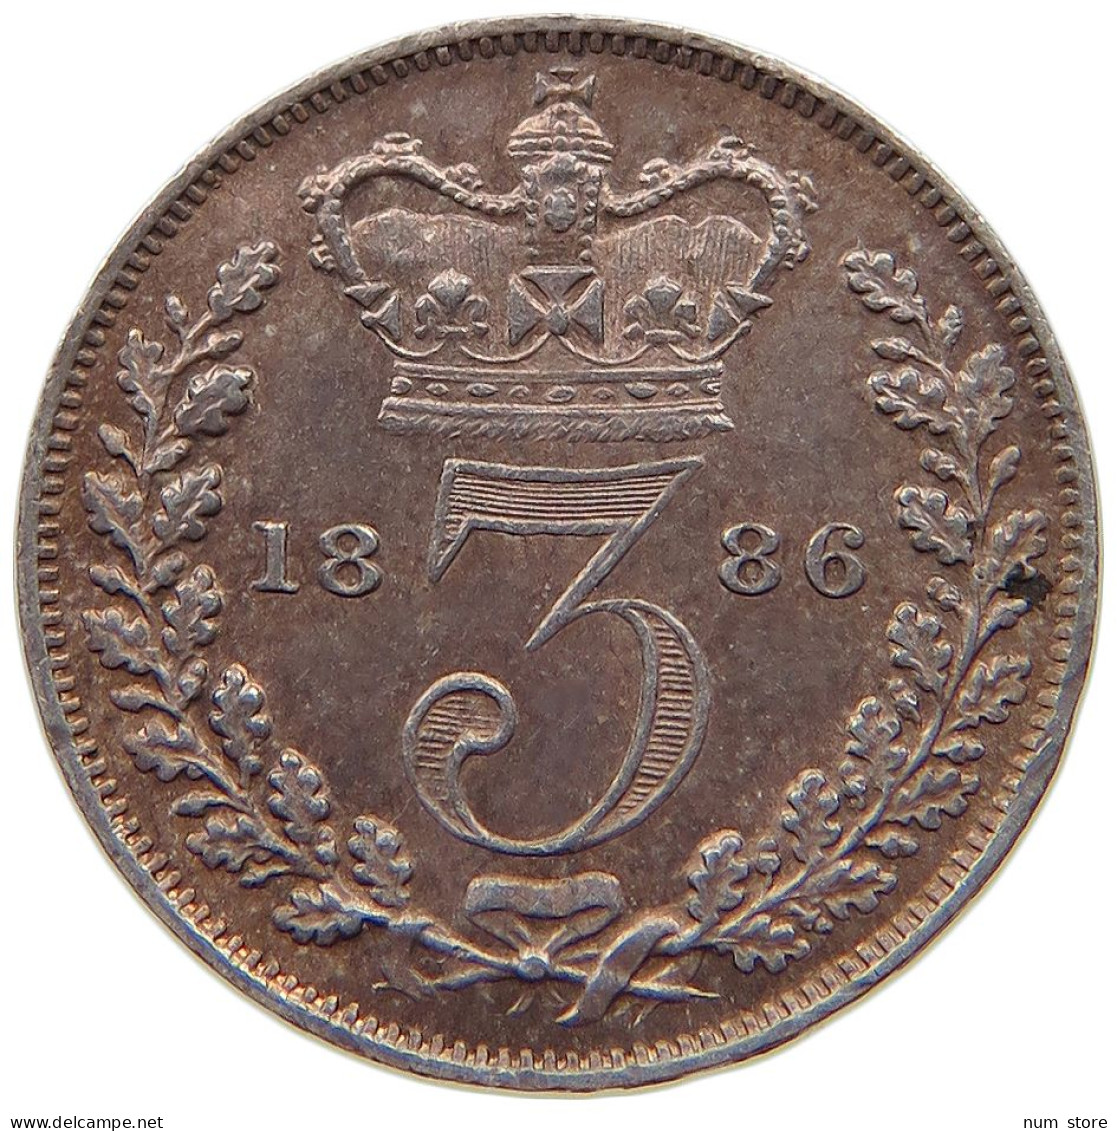 GREAT BRITAIN THREEPENCE 1886 Victoria 1837-1901 #t059 0123 - F. 3 Pence